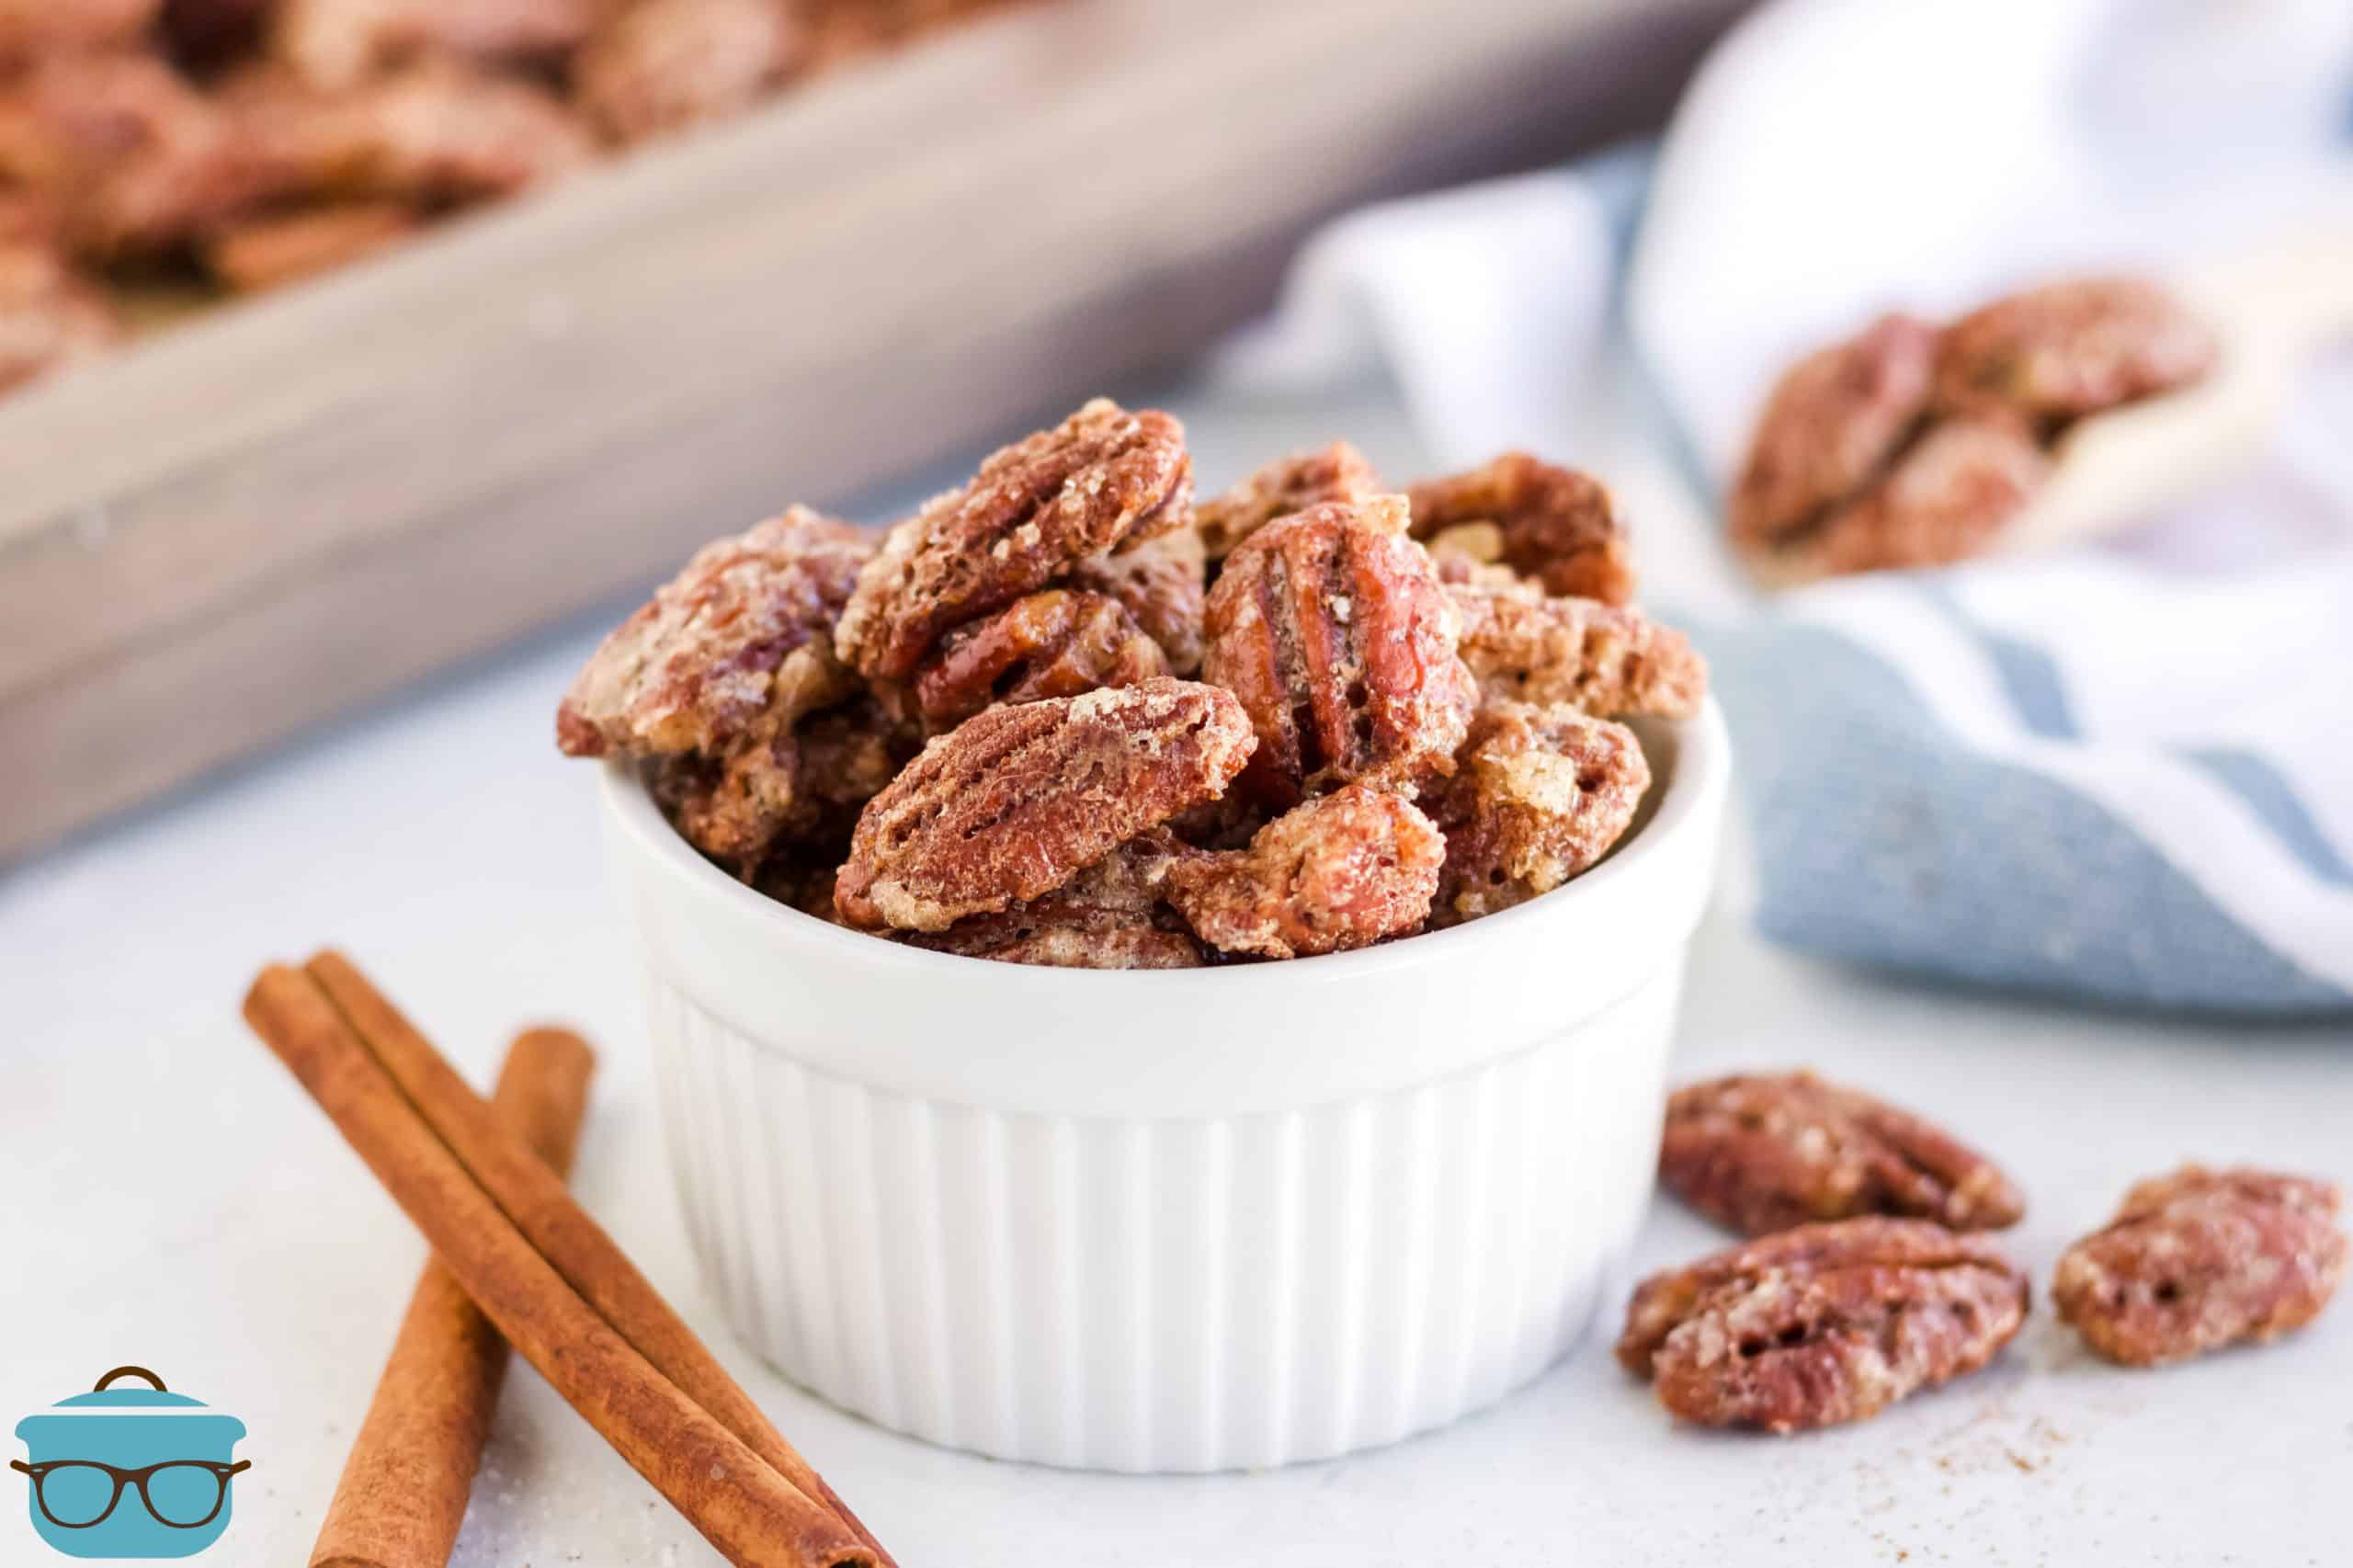 candied pecans shown in a small white ramekin bowl with cinnamon sticks on the side.